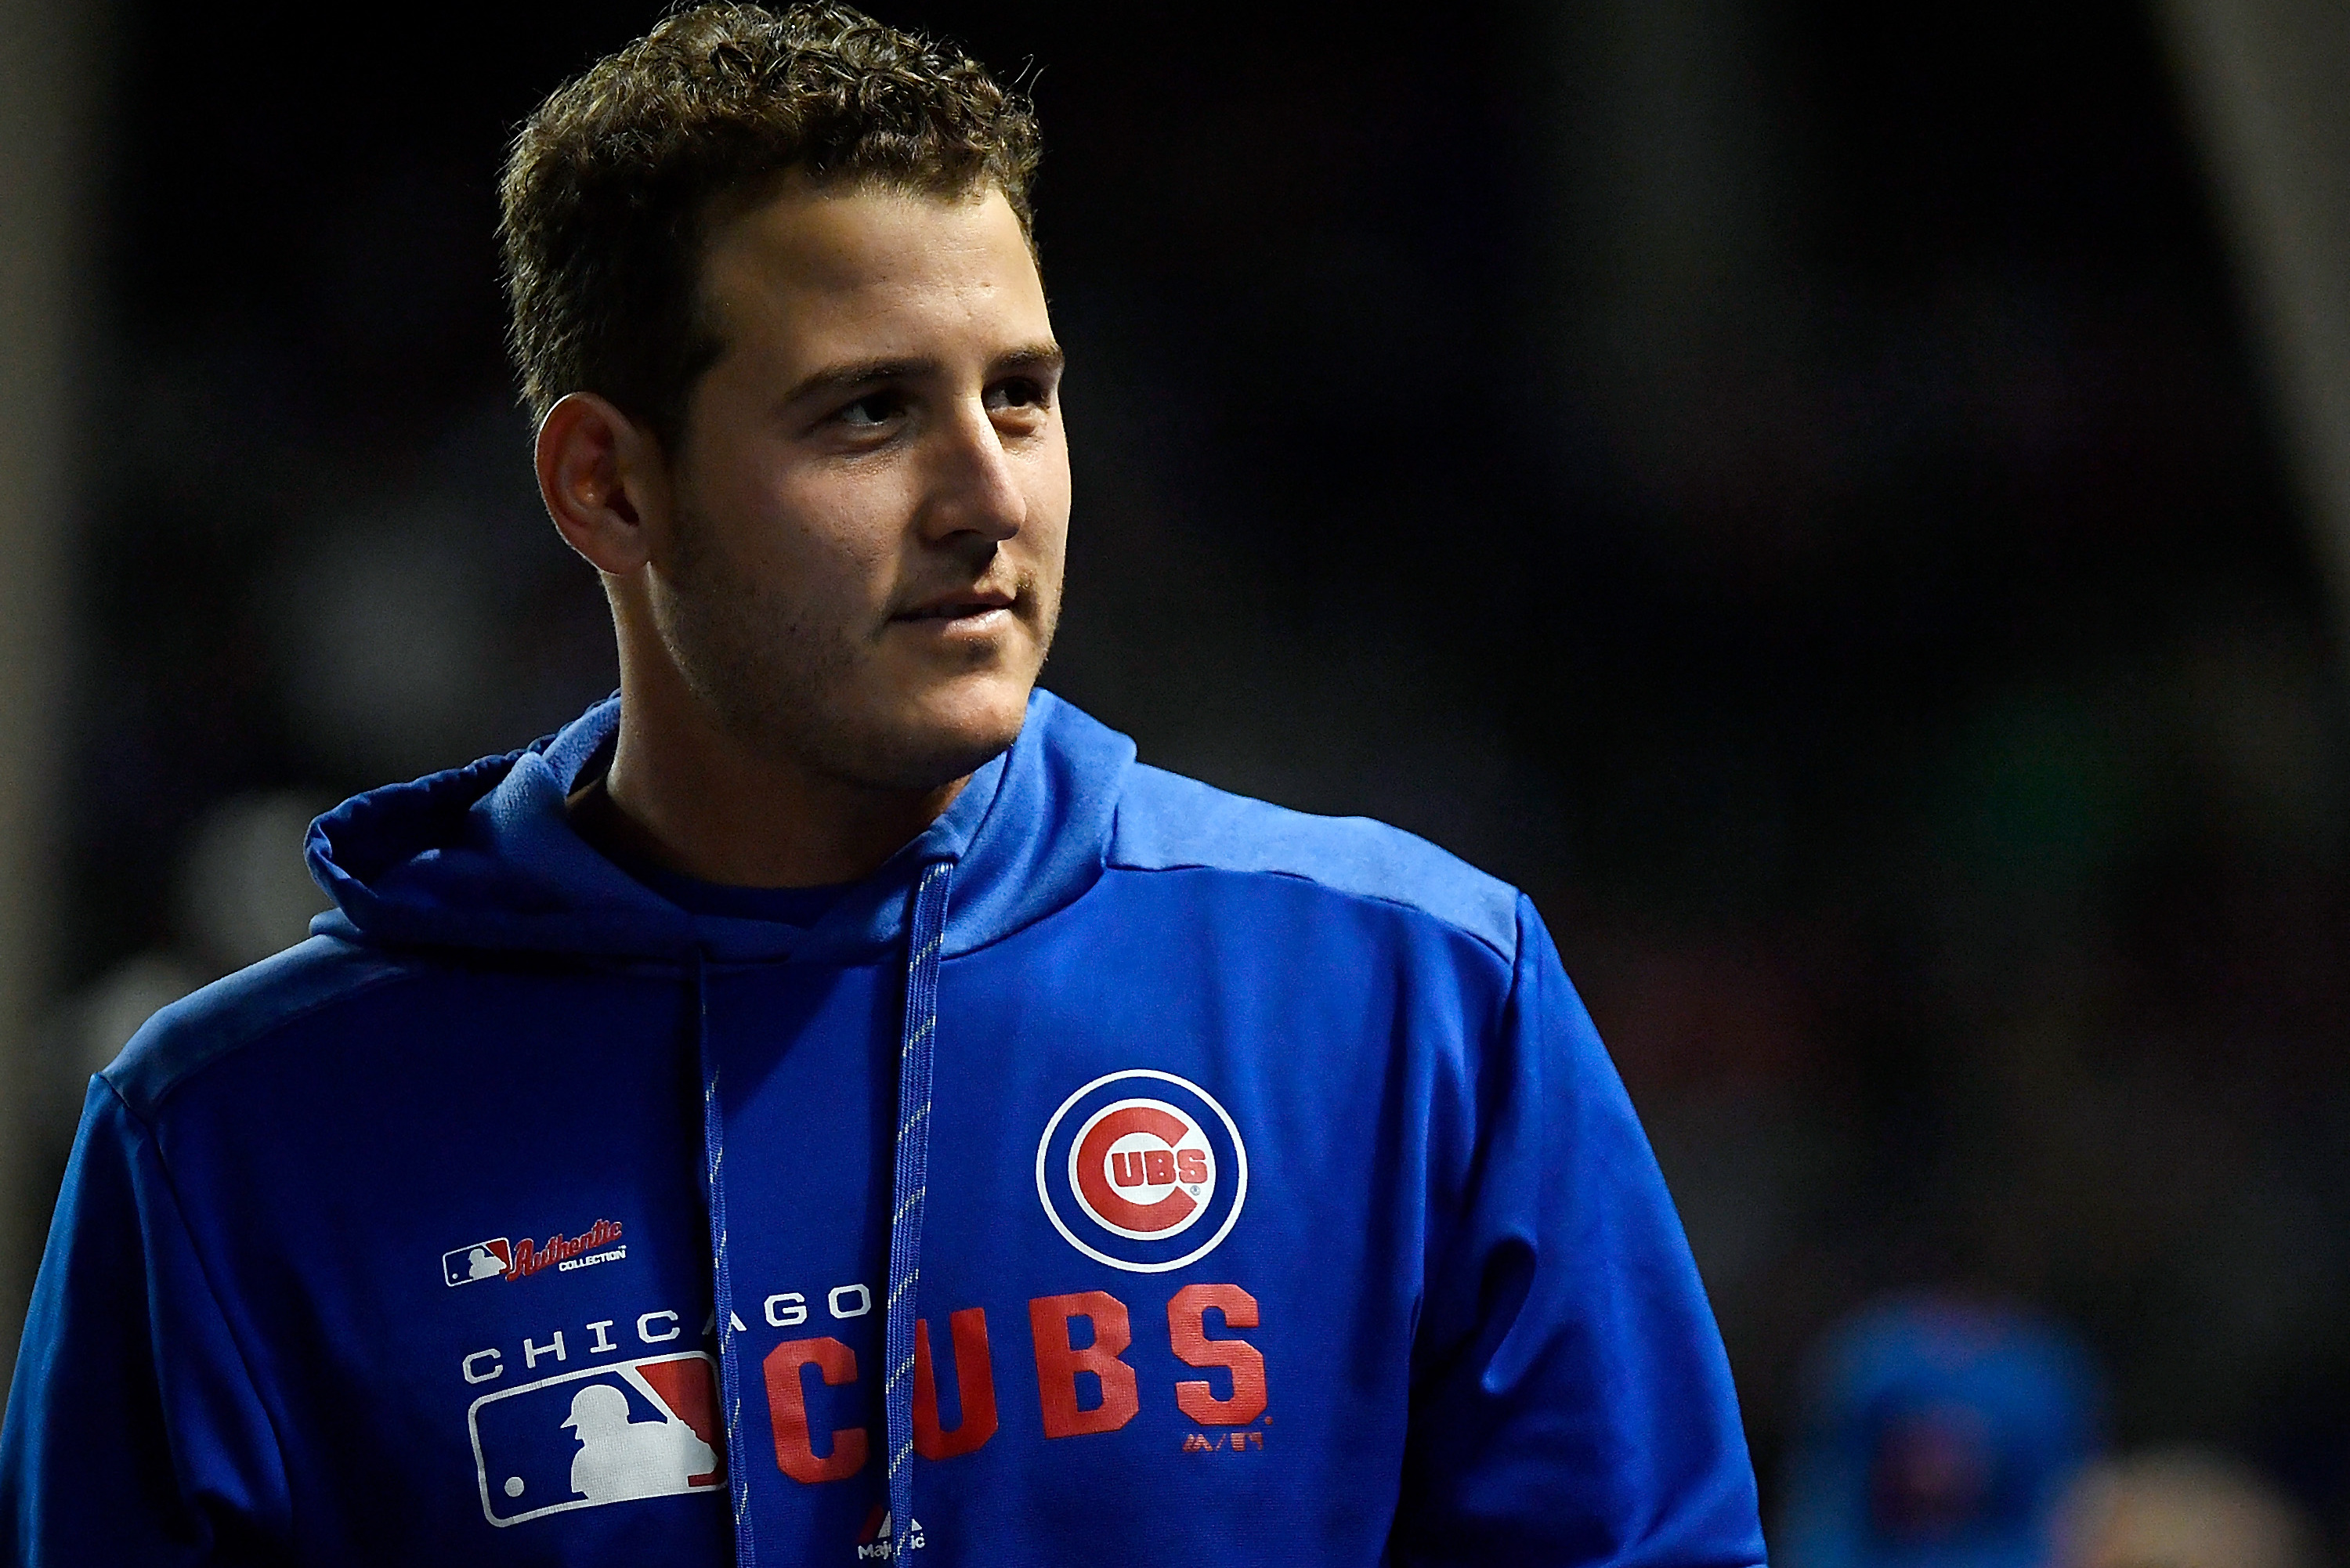 Cubs' Anthony Rizzo Fears Late MLB Return Could Jeopardize 2 Years